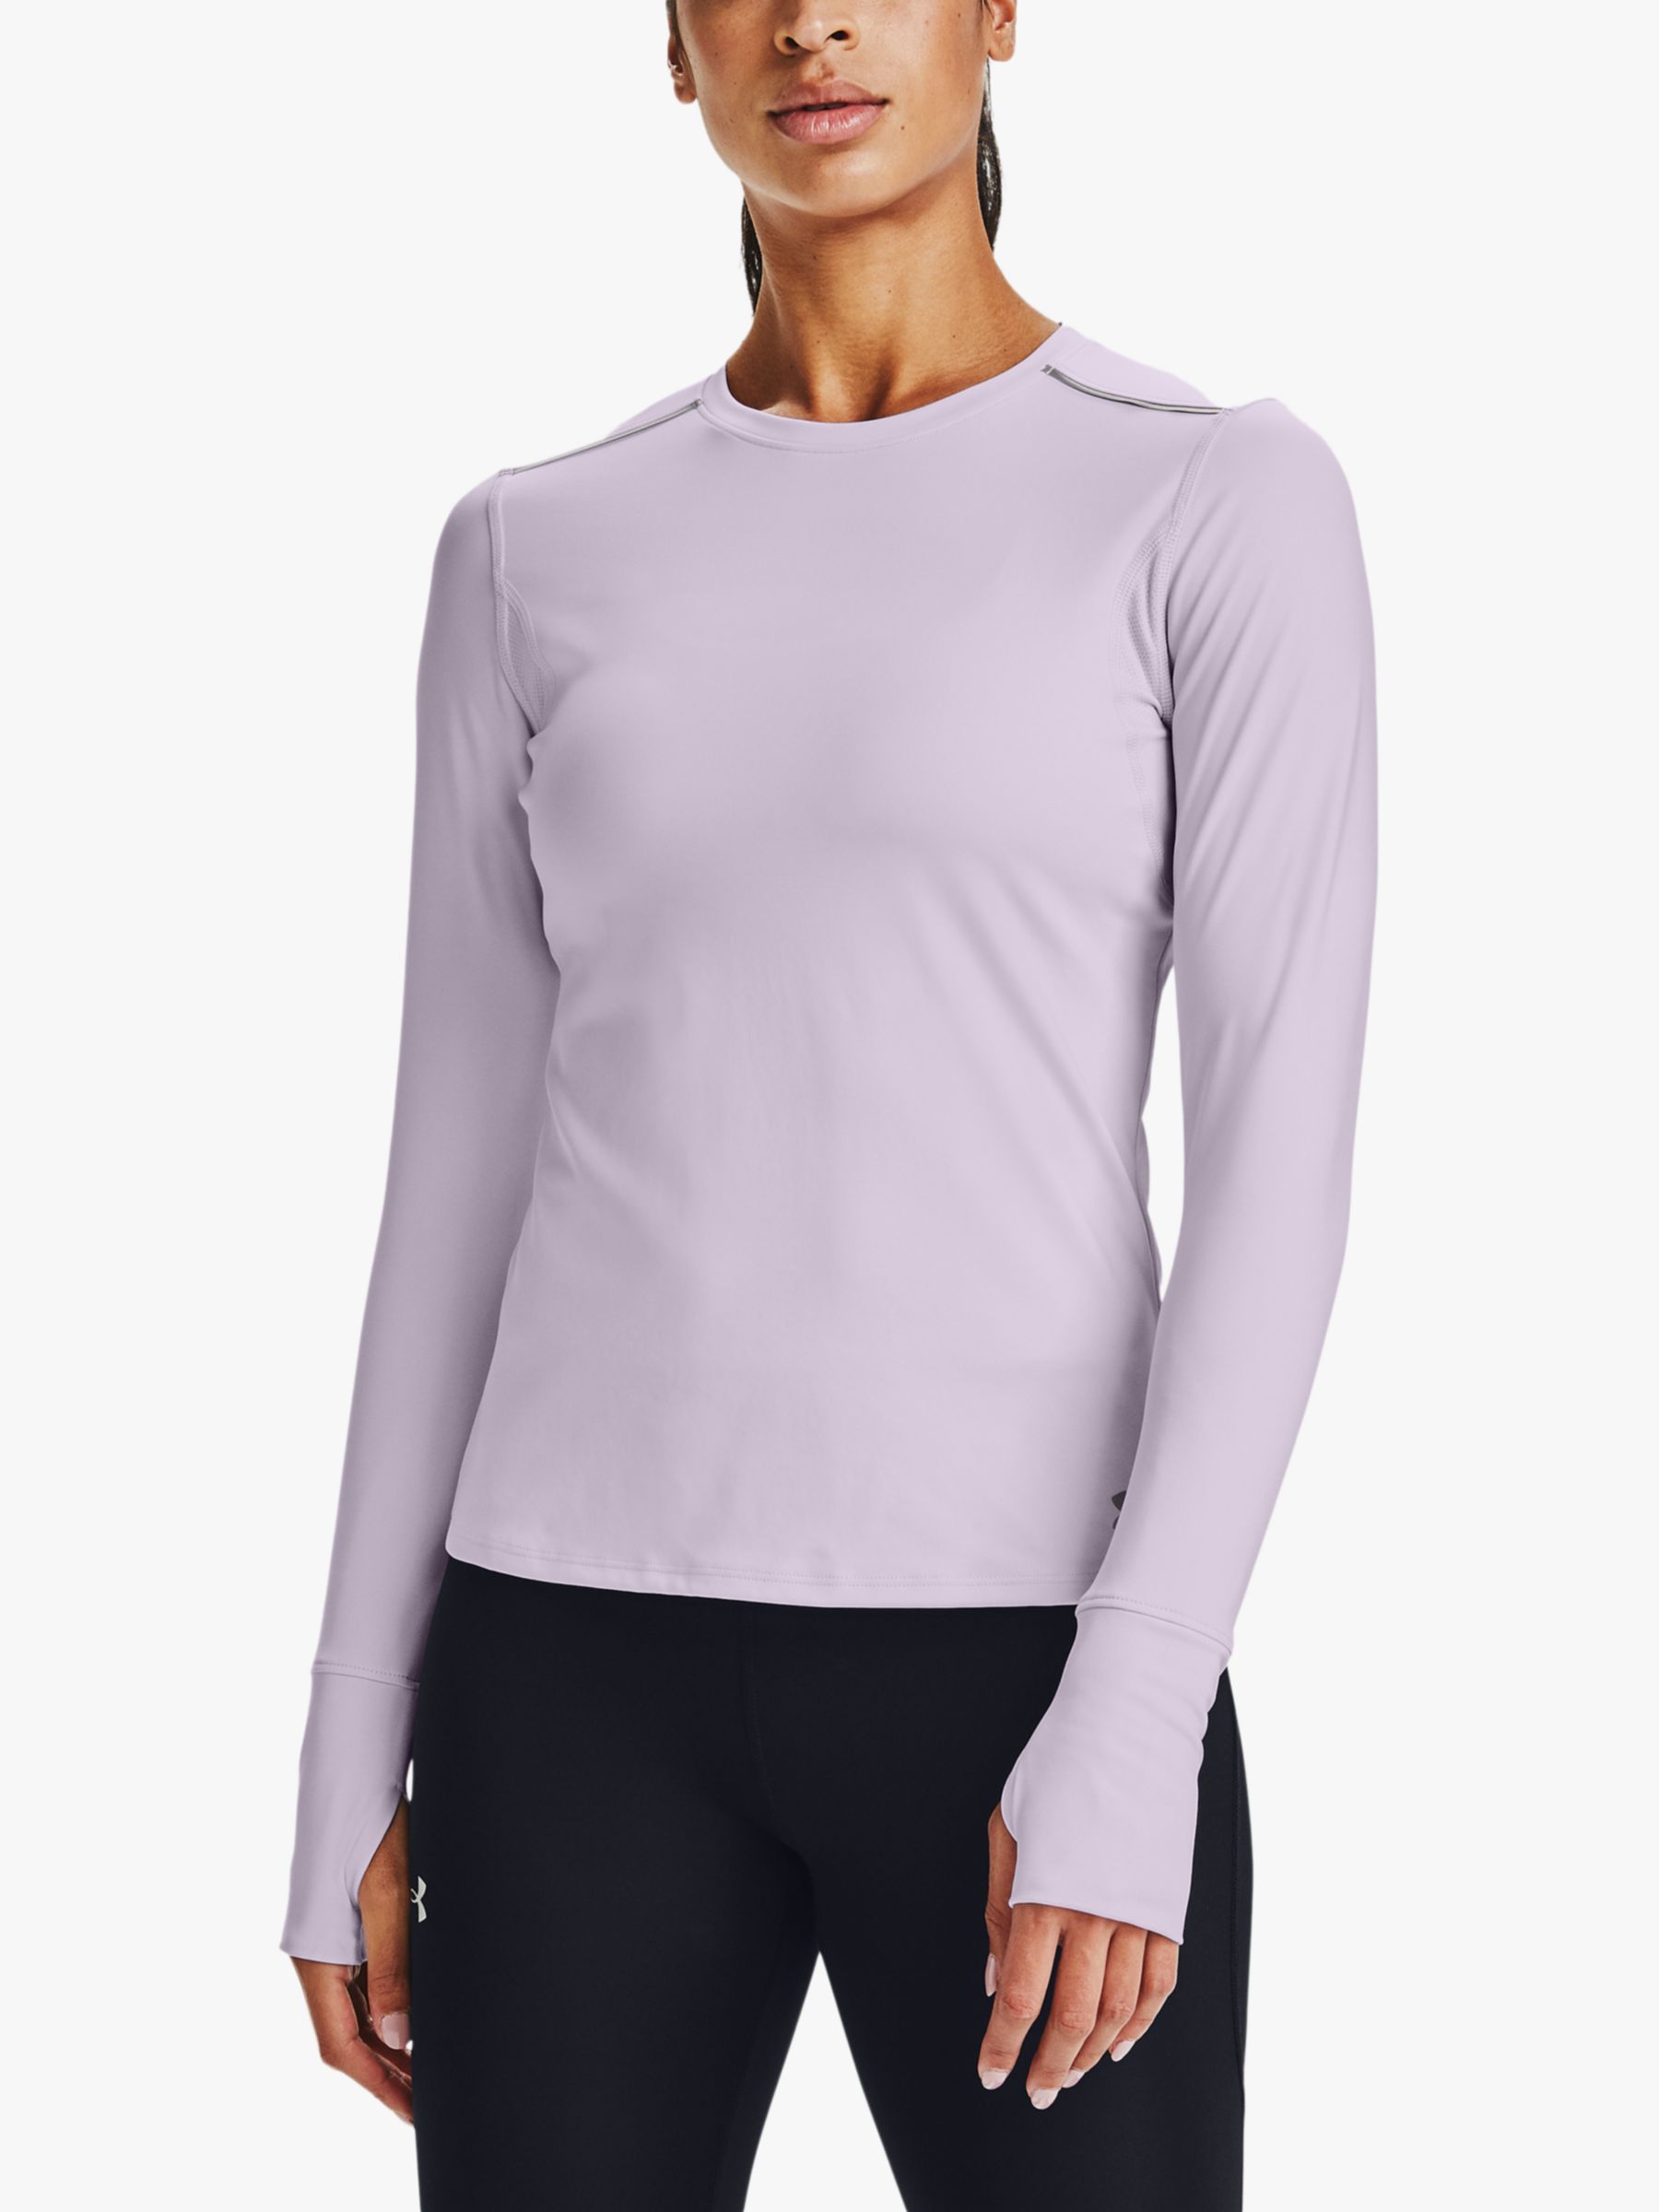 Under Armour Empowered Long Sleeve Training Top, Crystal Lilac